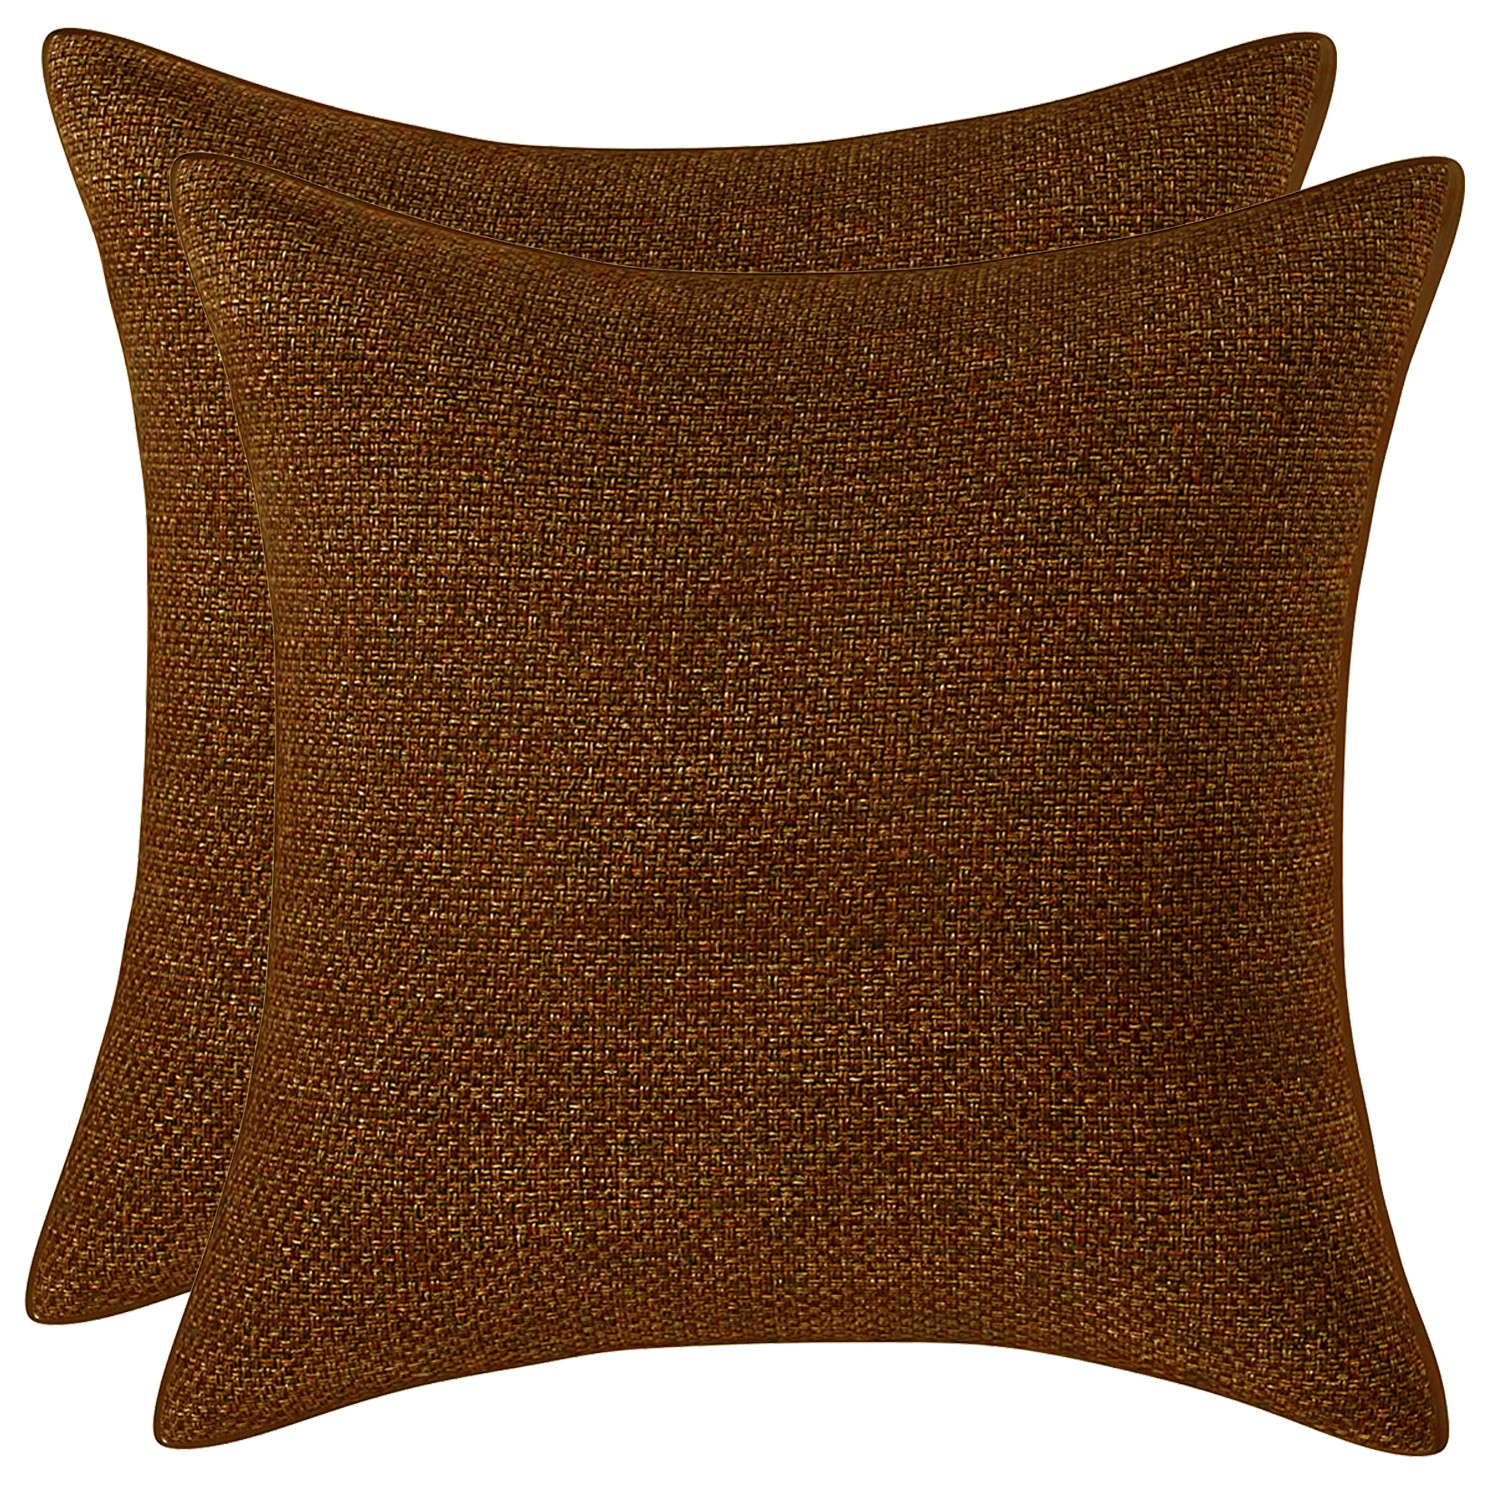 Kuber Industries Jute Blend Decorative Square Throw Pillow Cover Cushion Covers Pillowcase, Home Decor Decorations for Sofa Couch Bed Chair 24x24 Inch- (Brown)